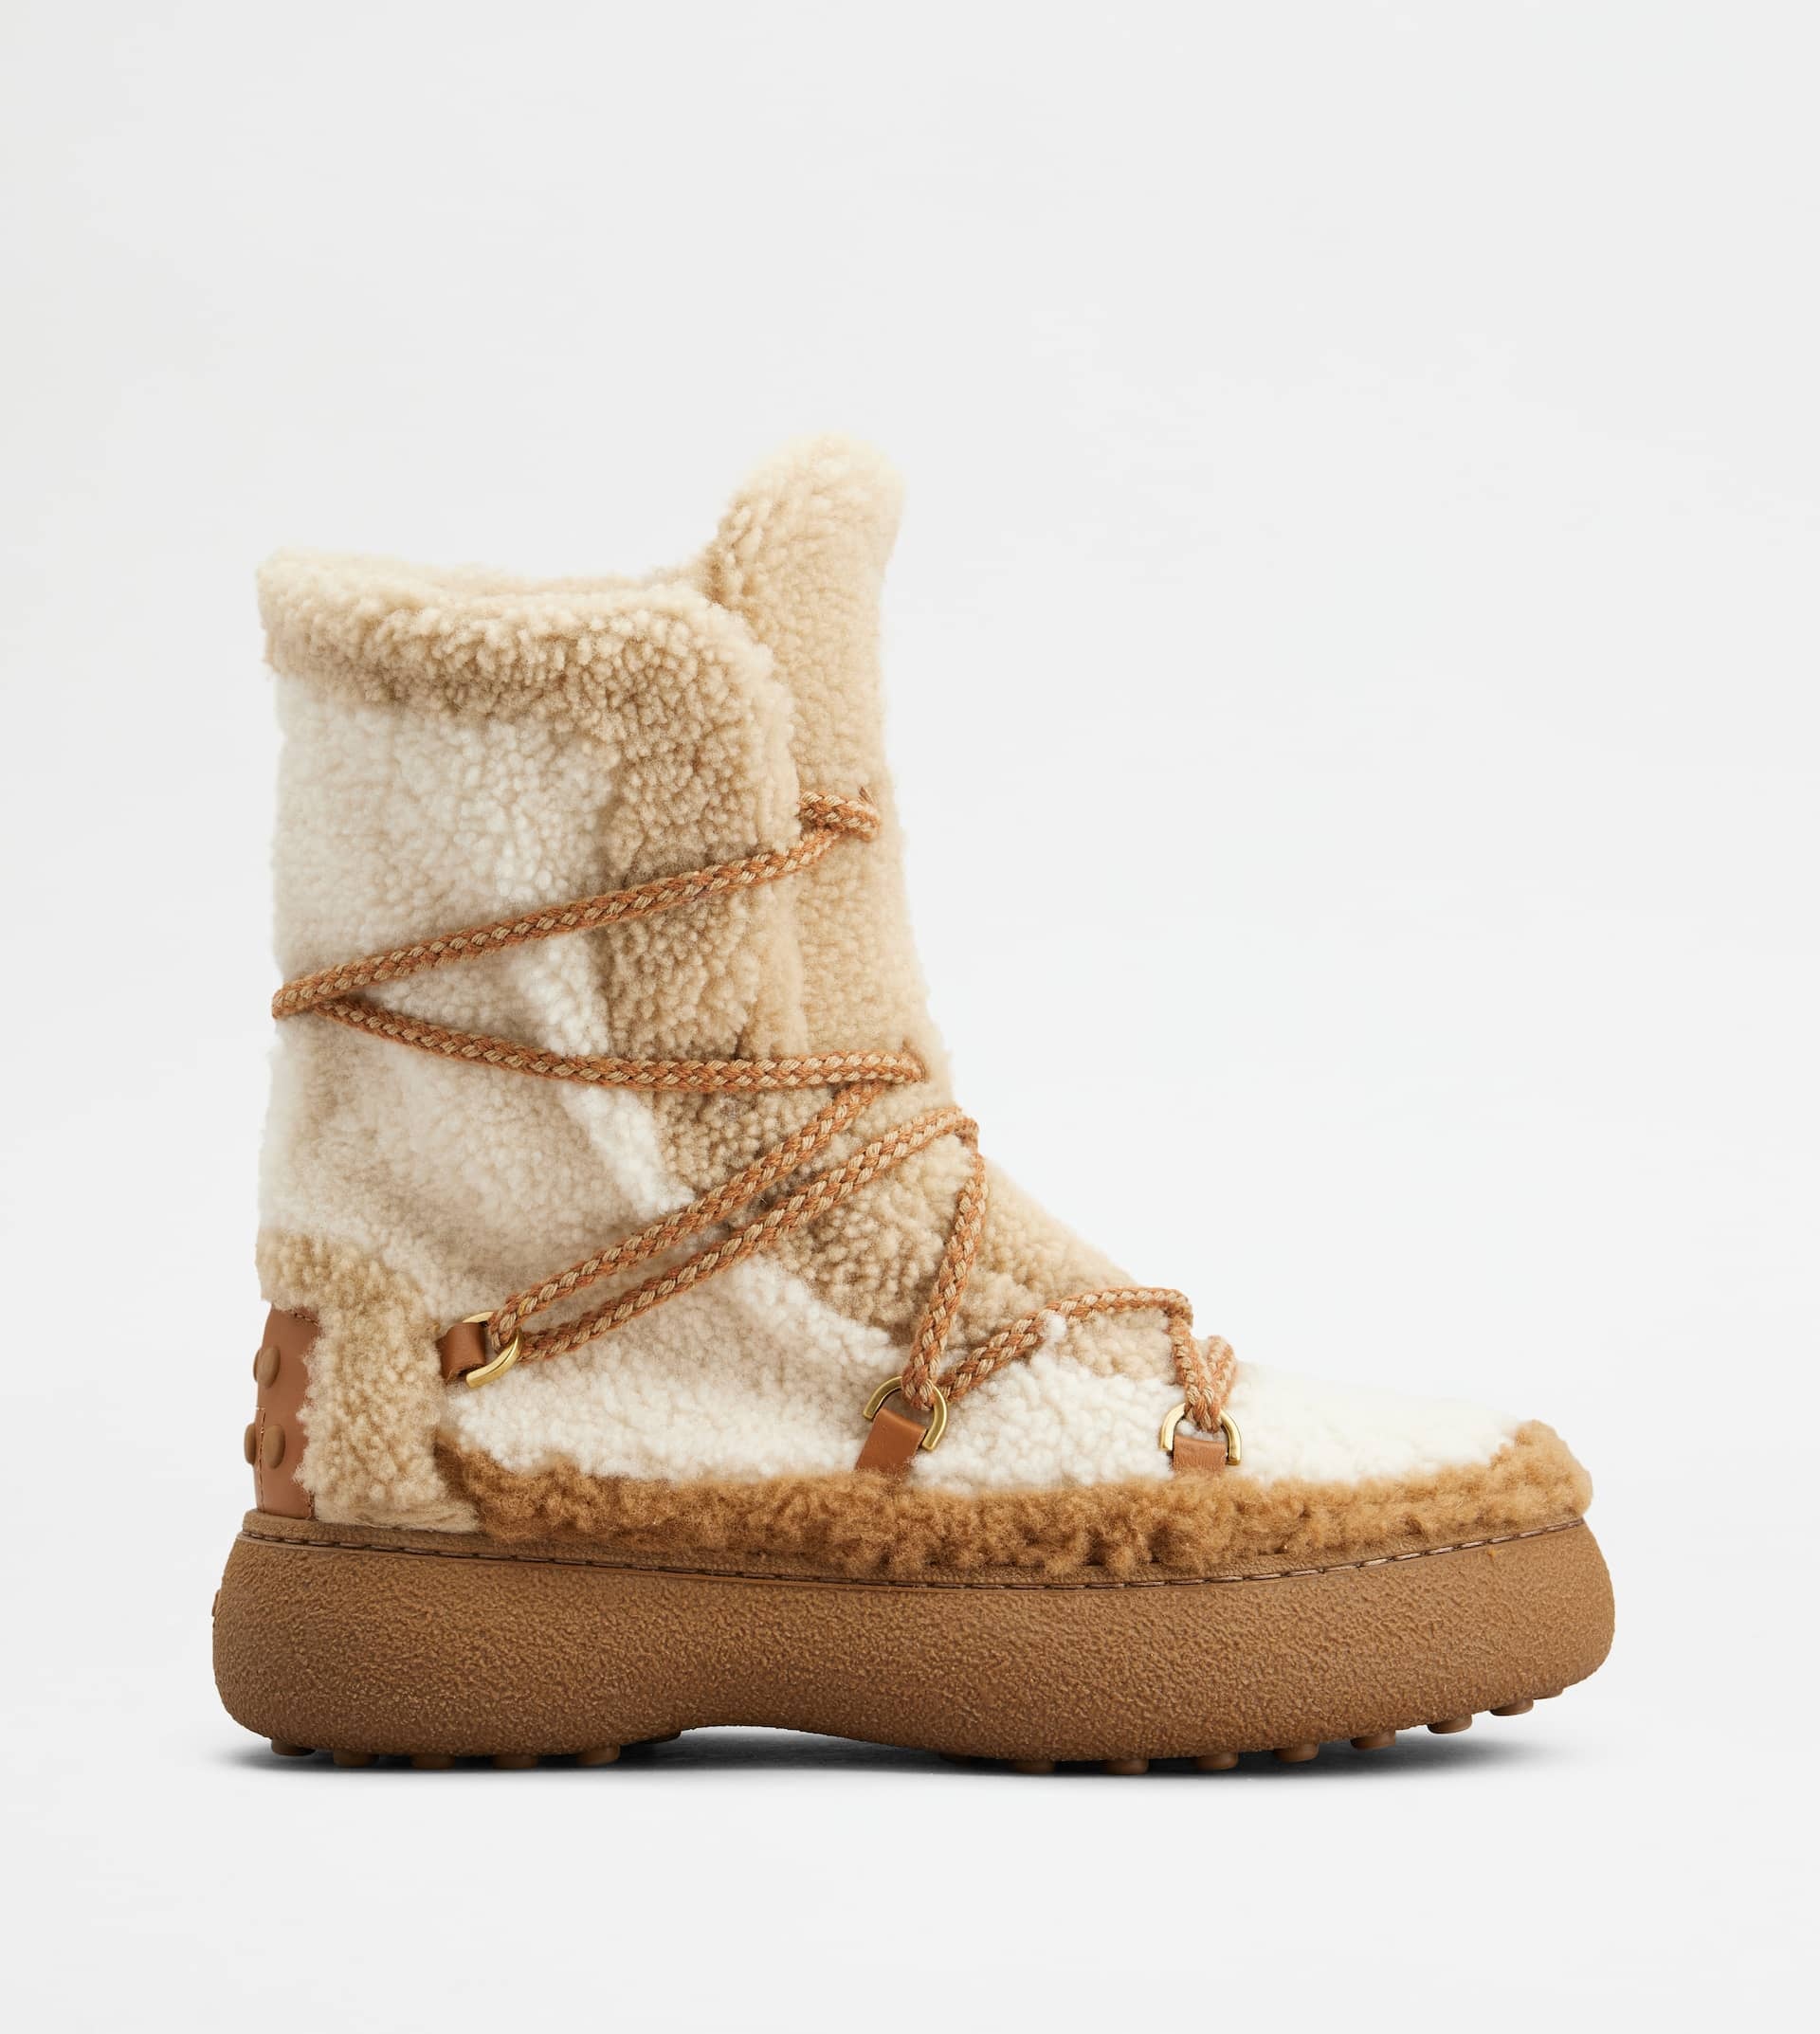 TOD'S W. G. LACE-UP ANKLE BOOTS IN SHEEPSKIN - BEIGE, OFF WHITE, BROWN - 1